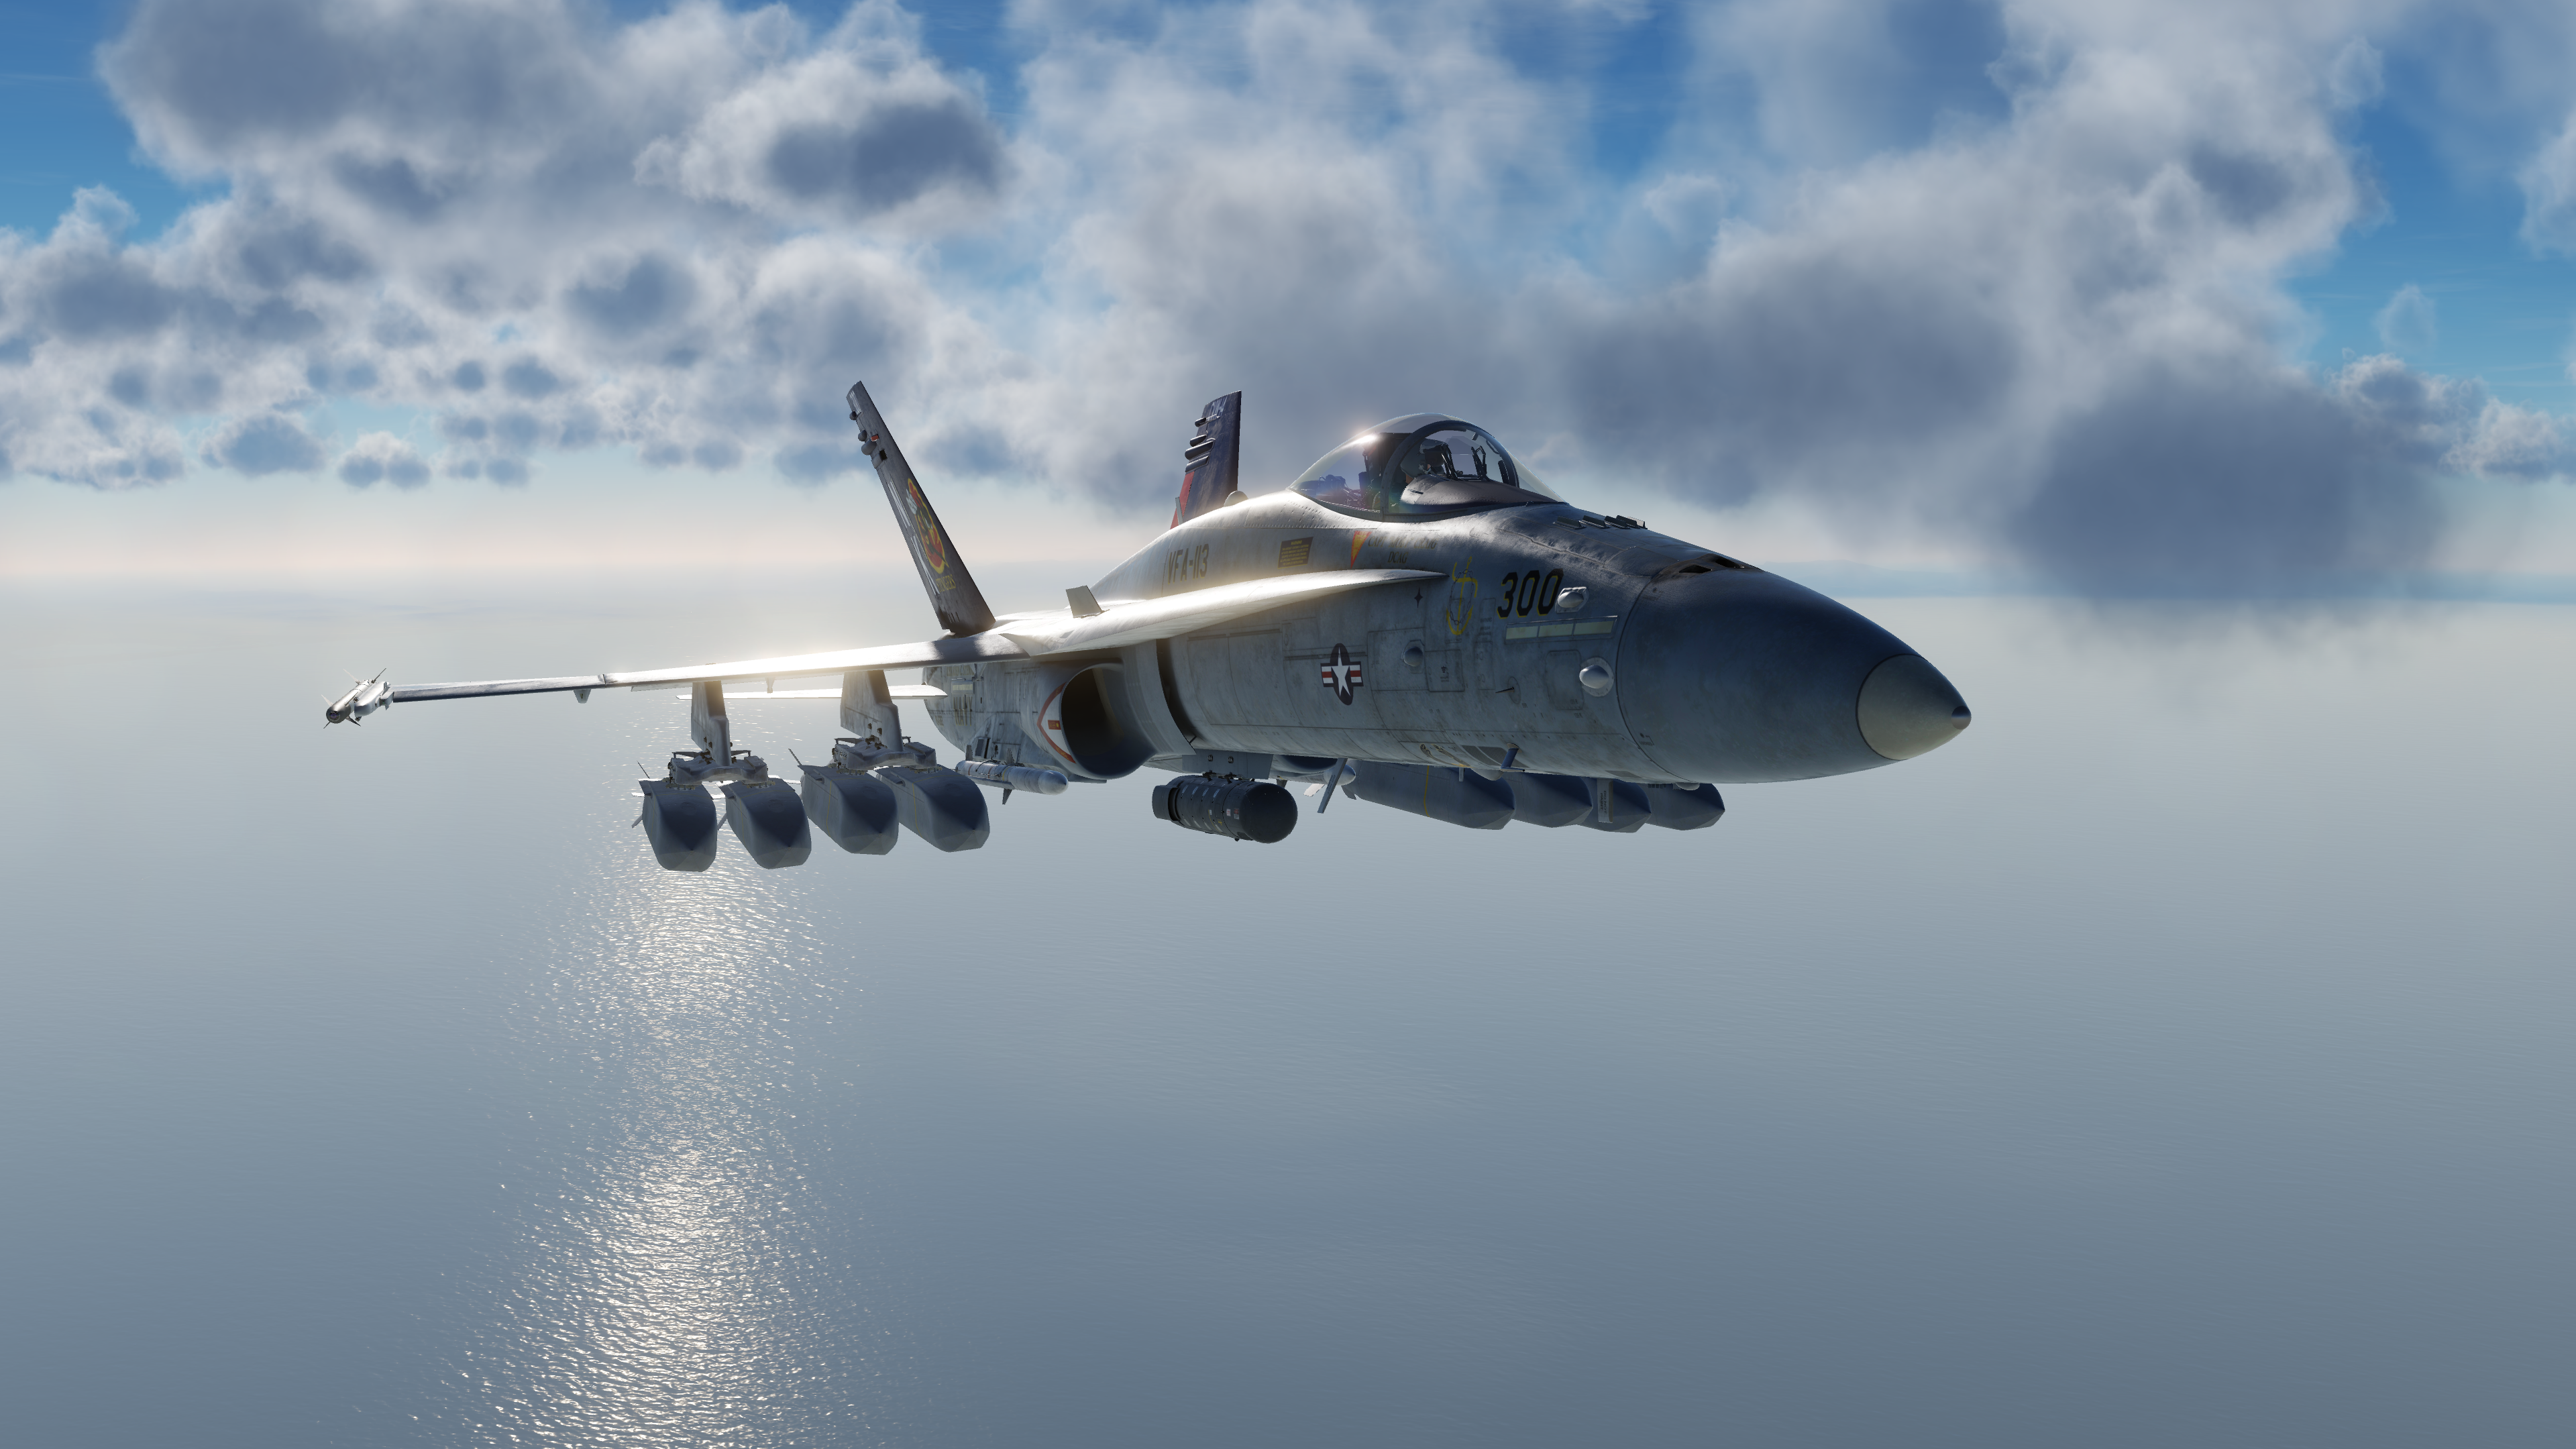 General 3840x2160 Digital Combat Simulator military aircraft military aircraft numbers sky vehicle McDonnell Douglas F/A-18 Hornet military vehicle screen shot